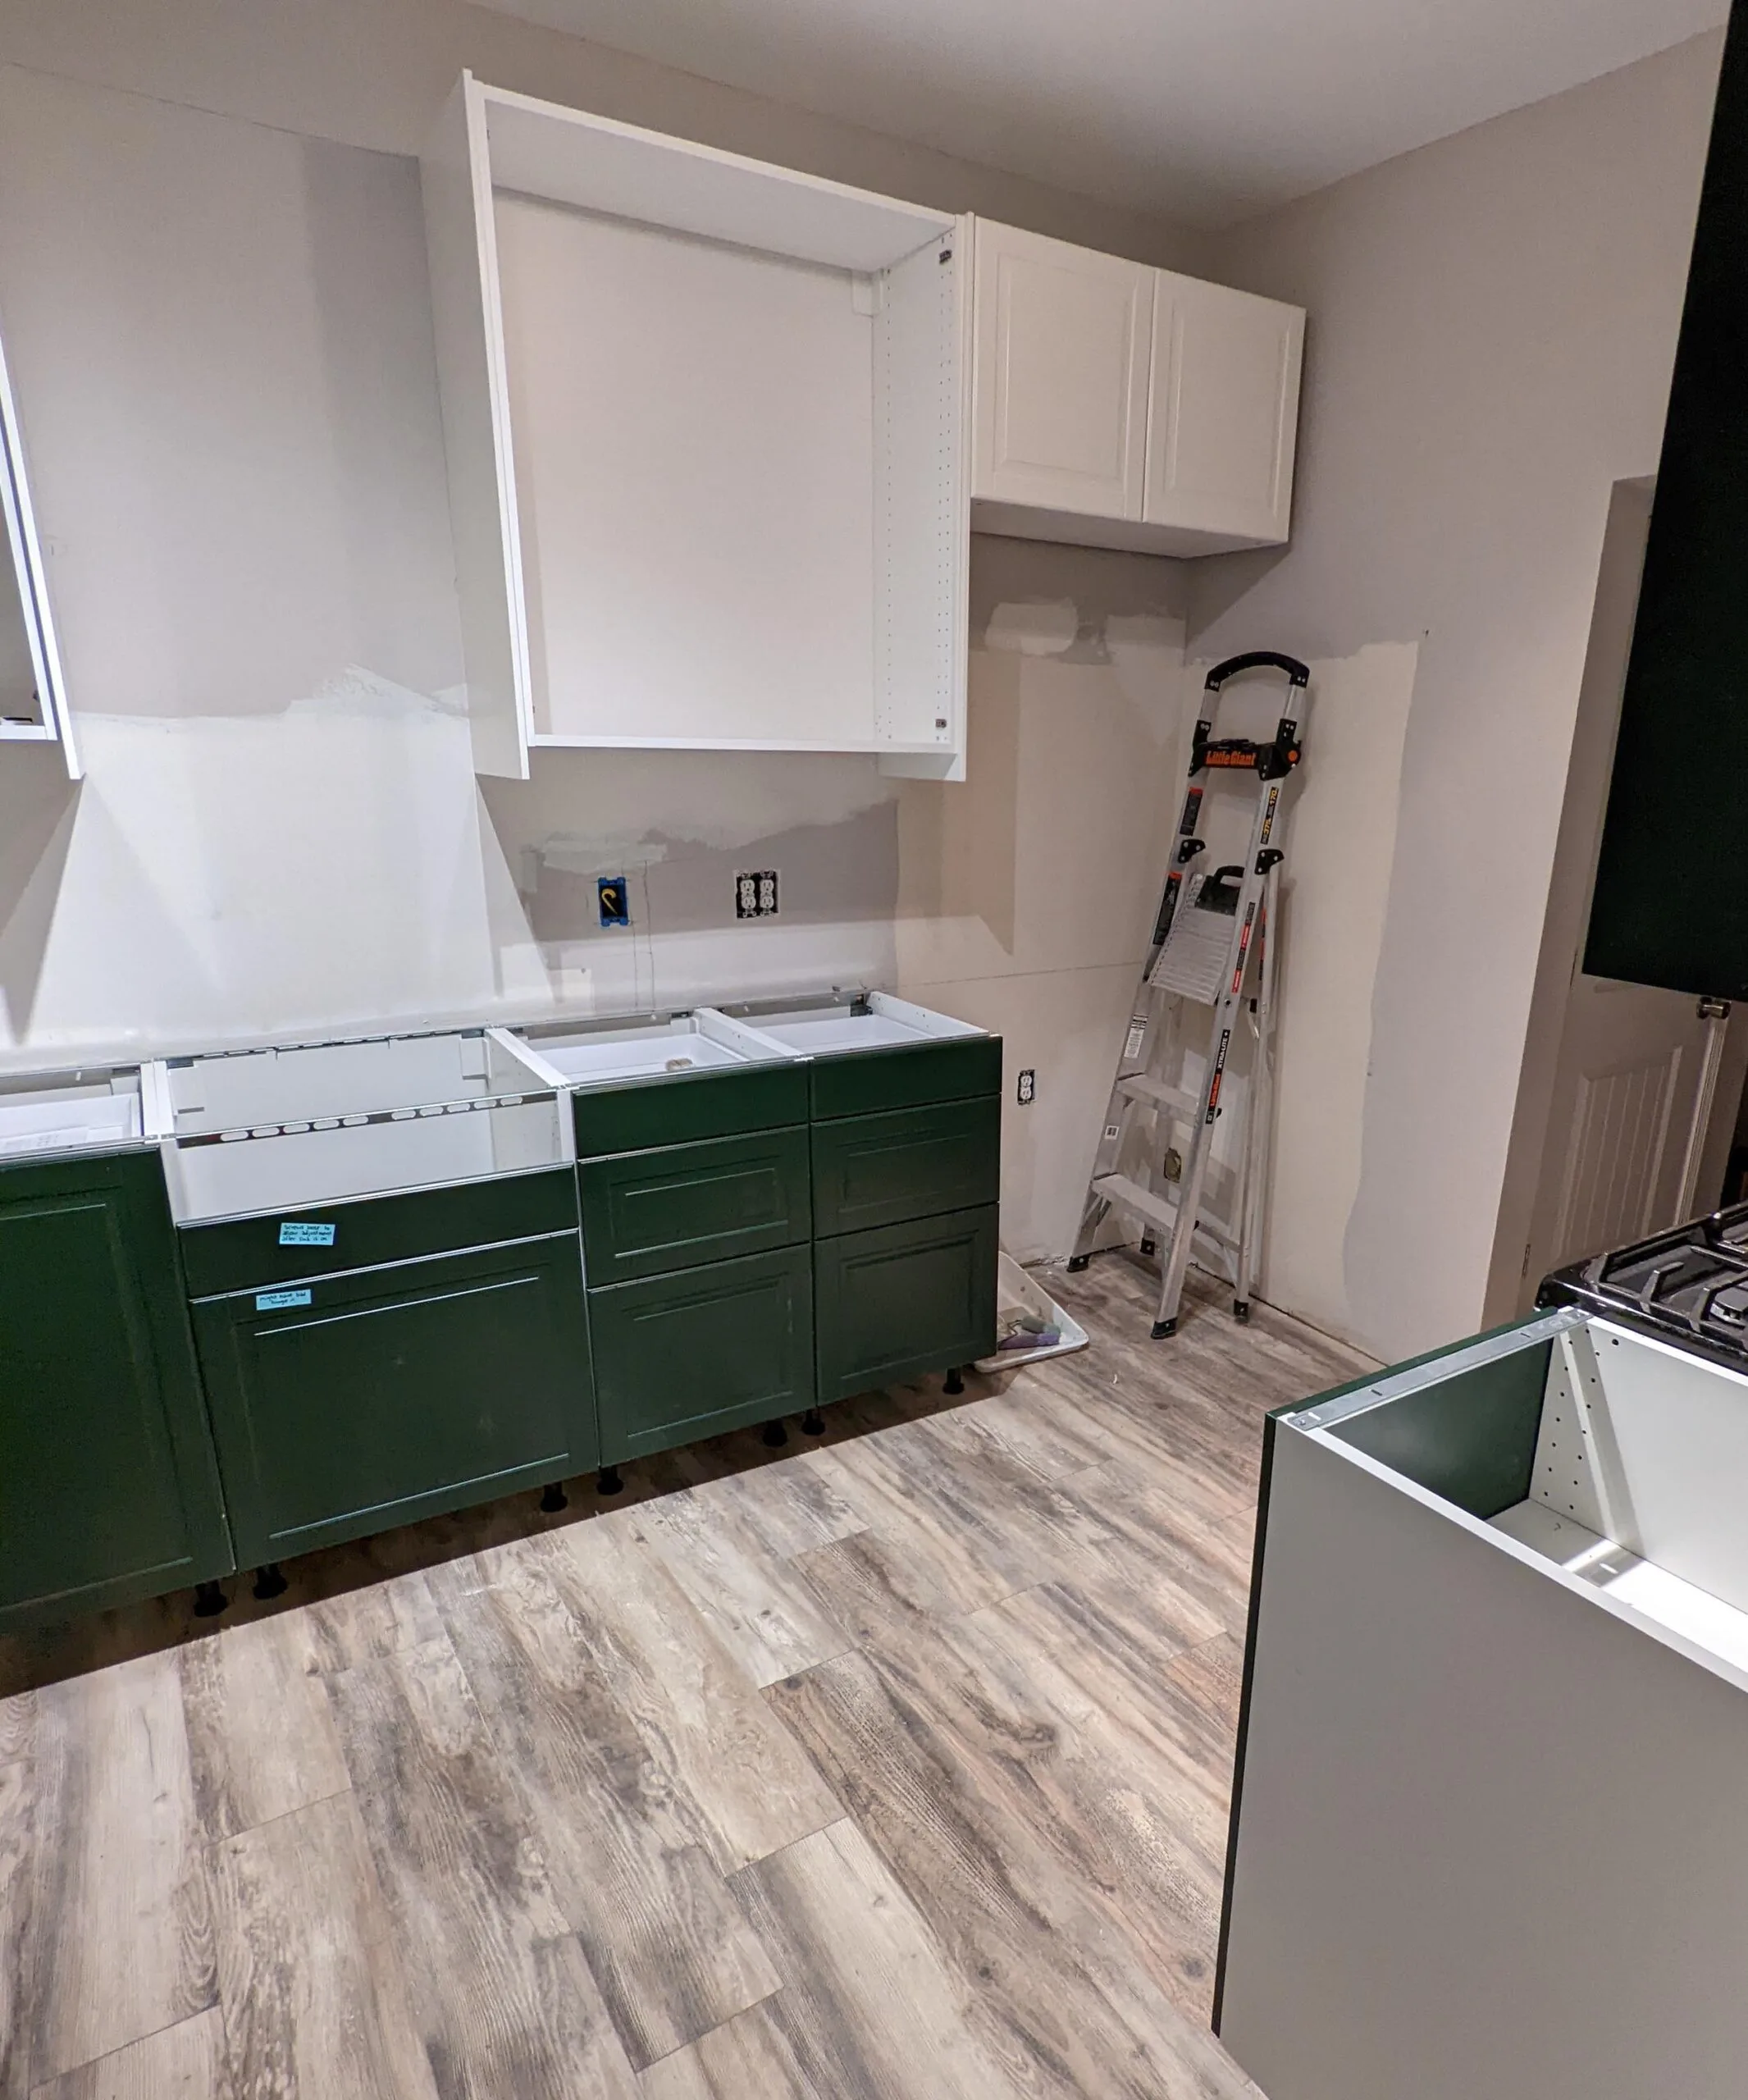 A green IKEA kitchen renovation in progress, shown with half finished cabinets and no appliances.